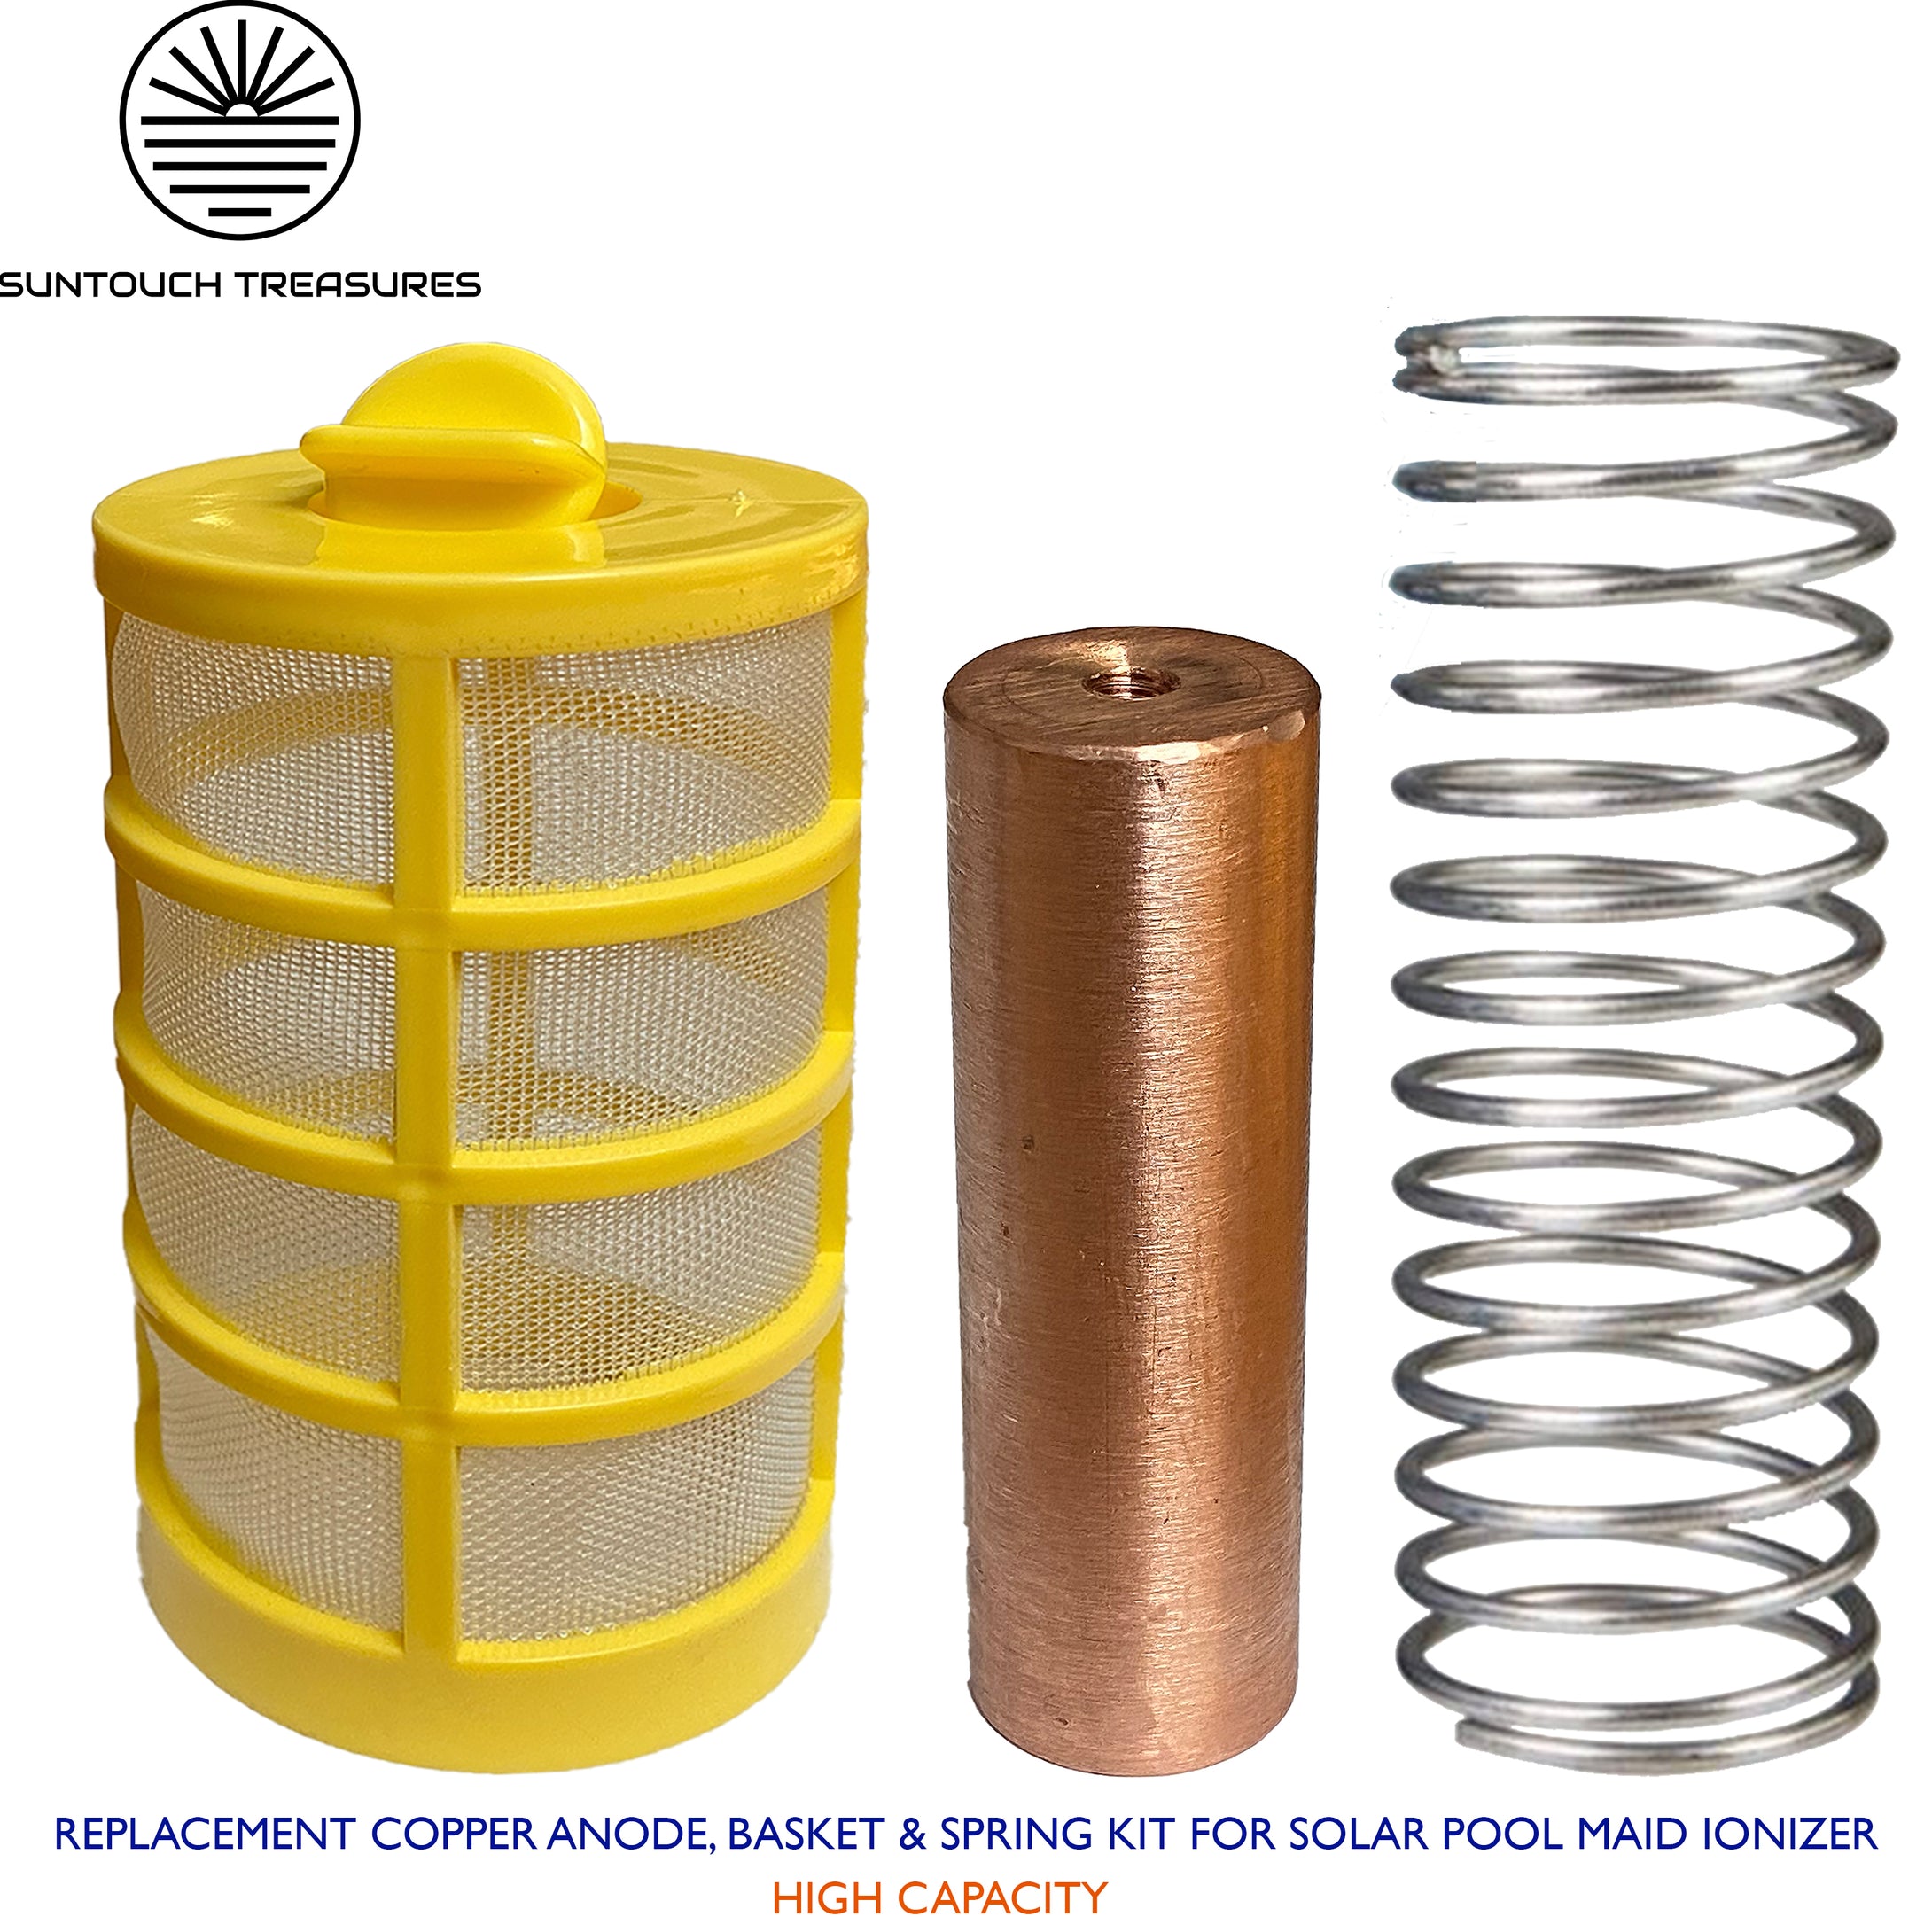 SUNTOUCH TREASURES - Replacement Copper Anode, Basket & Spring Kit for Solar Pool Maid Ionizer (High Capacity)